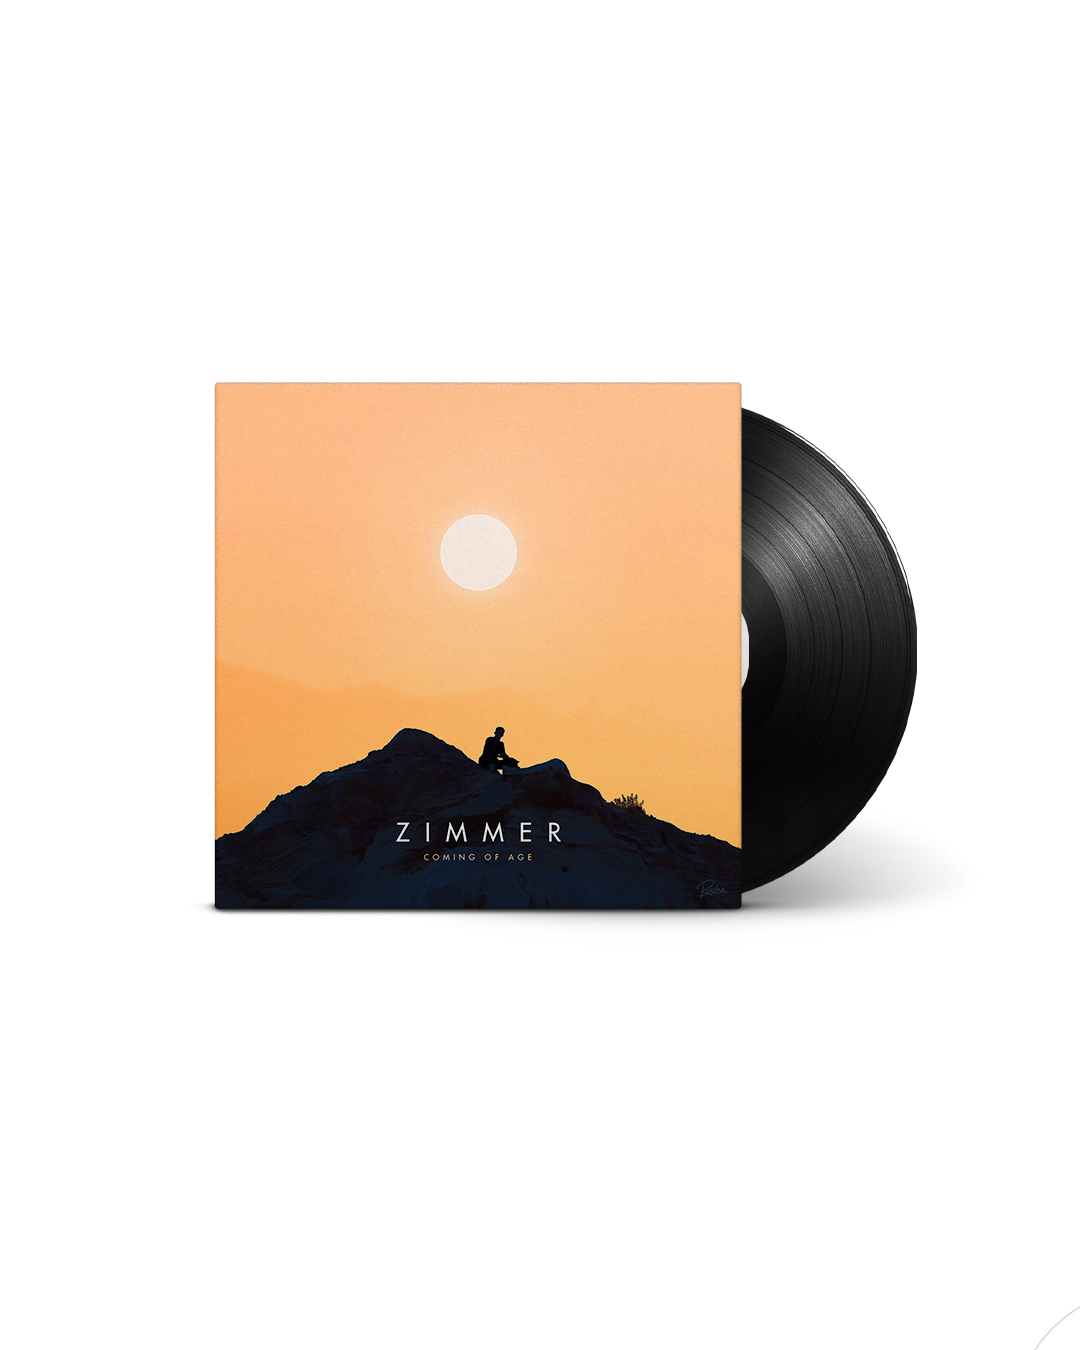 ZIMMER – COMING OF AGE – VINYL 12″ EP